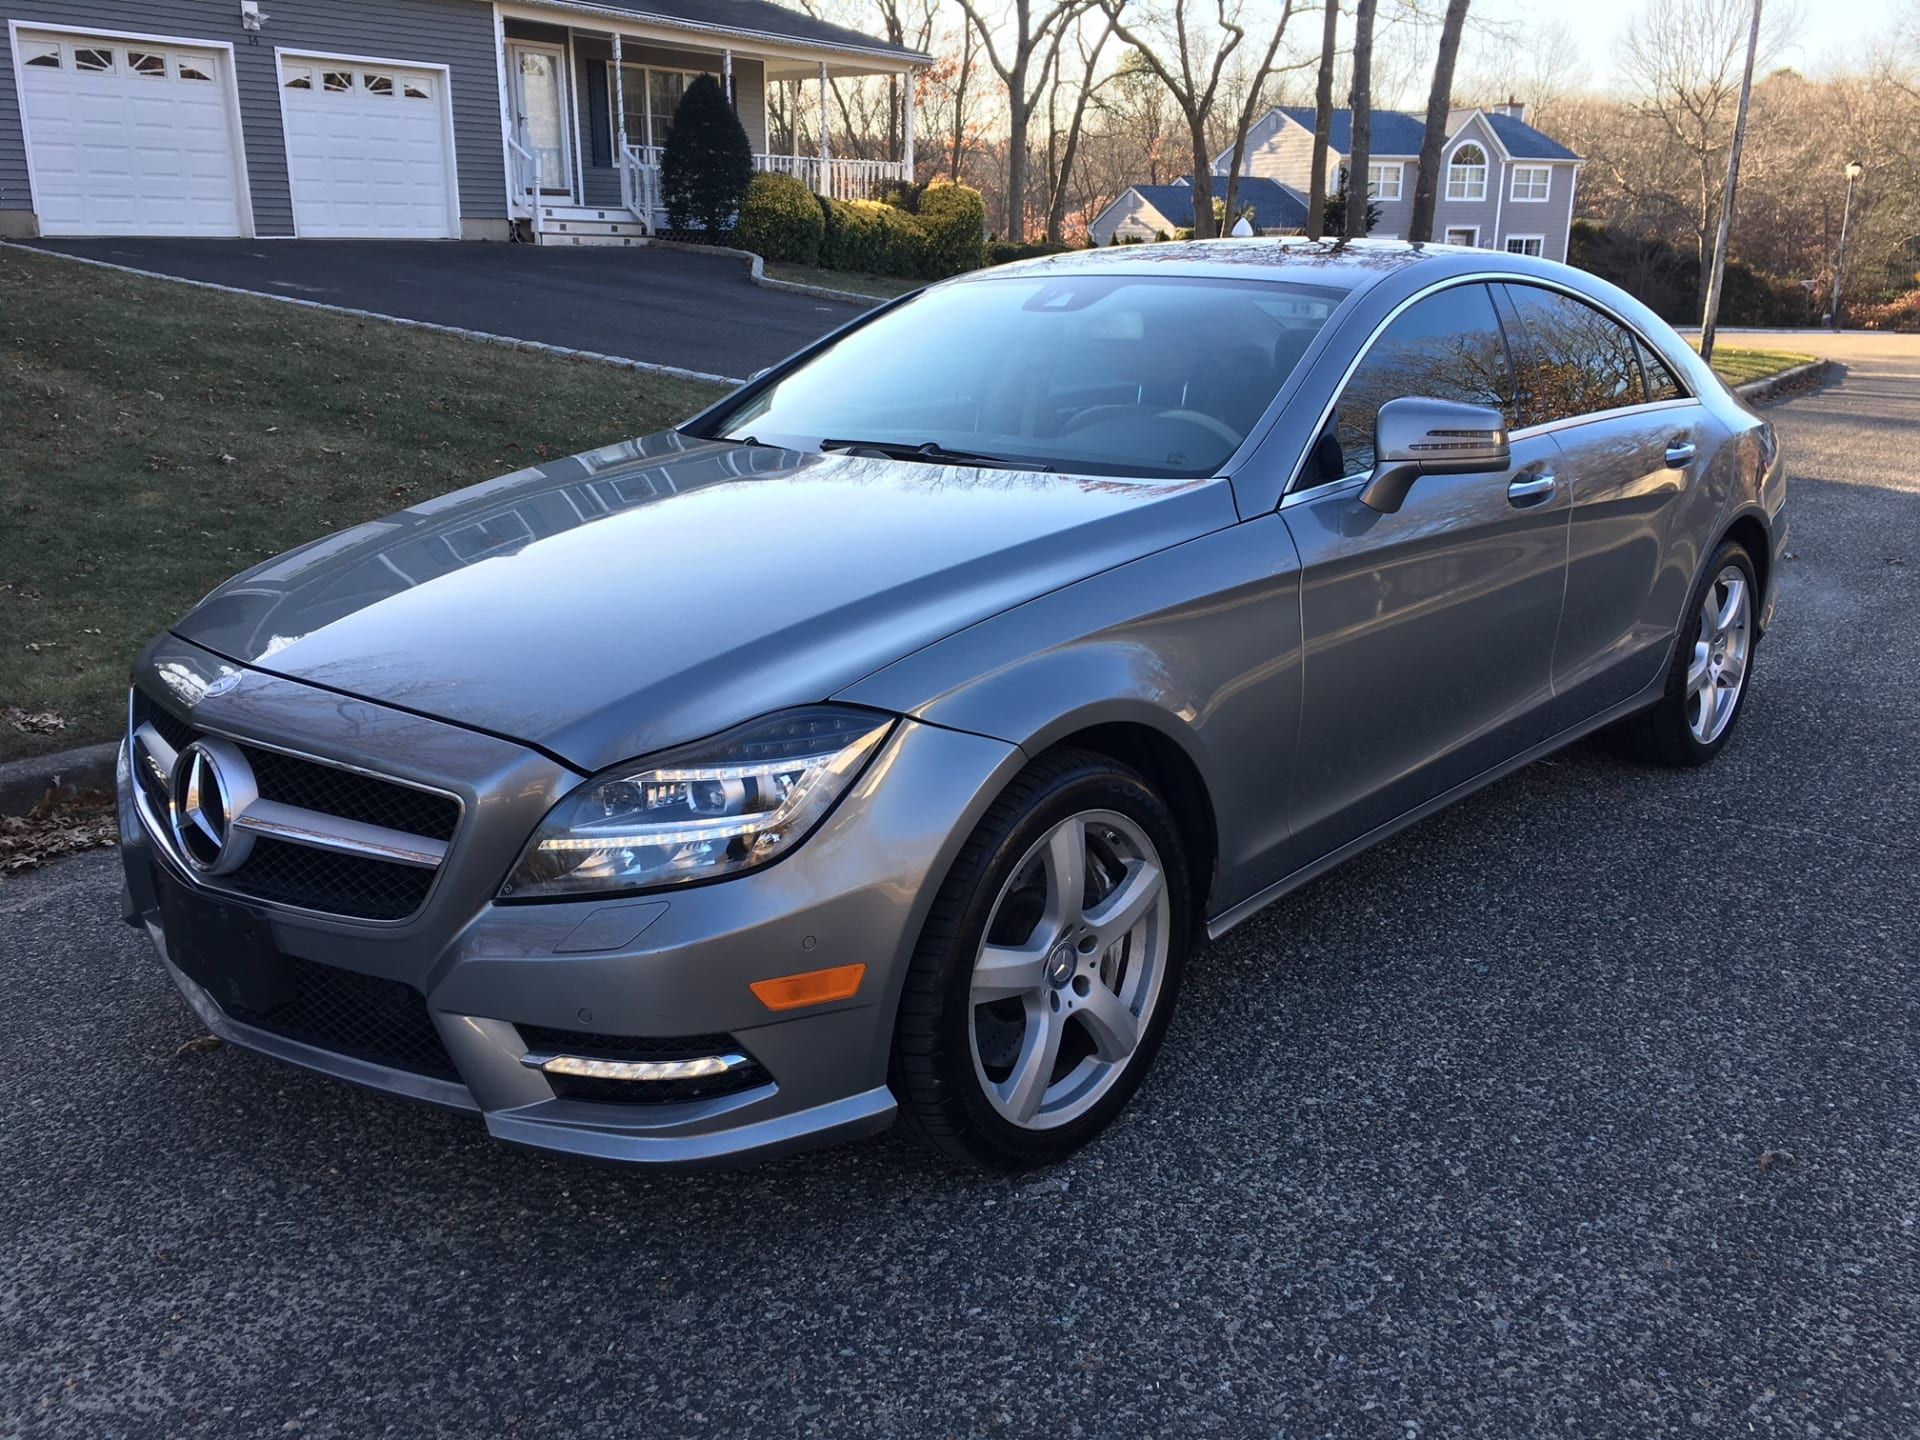 Gray 2013 Mercedes CLS550, parked